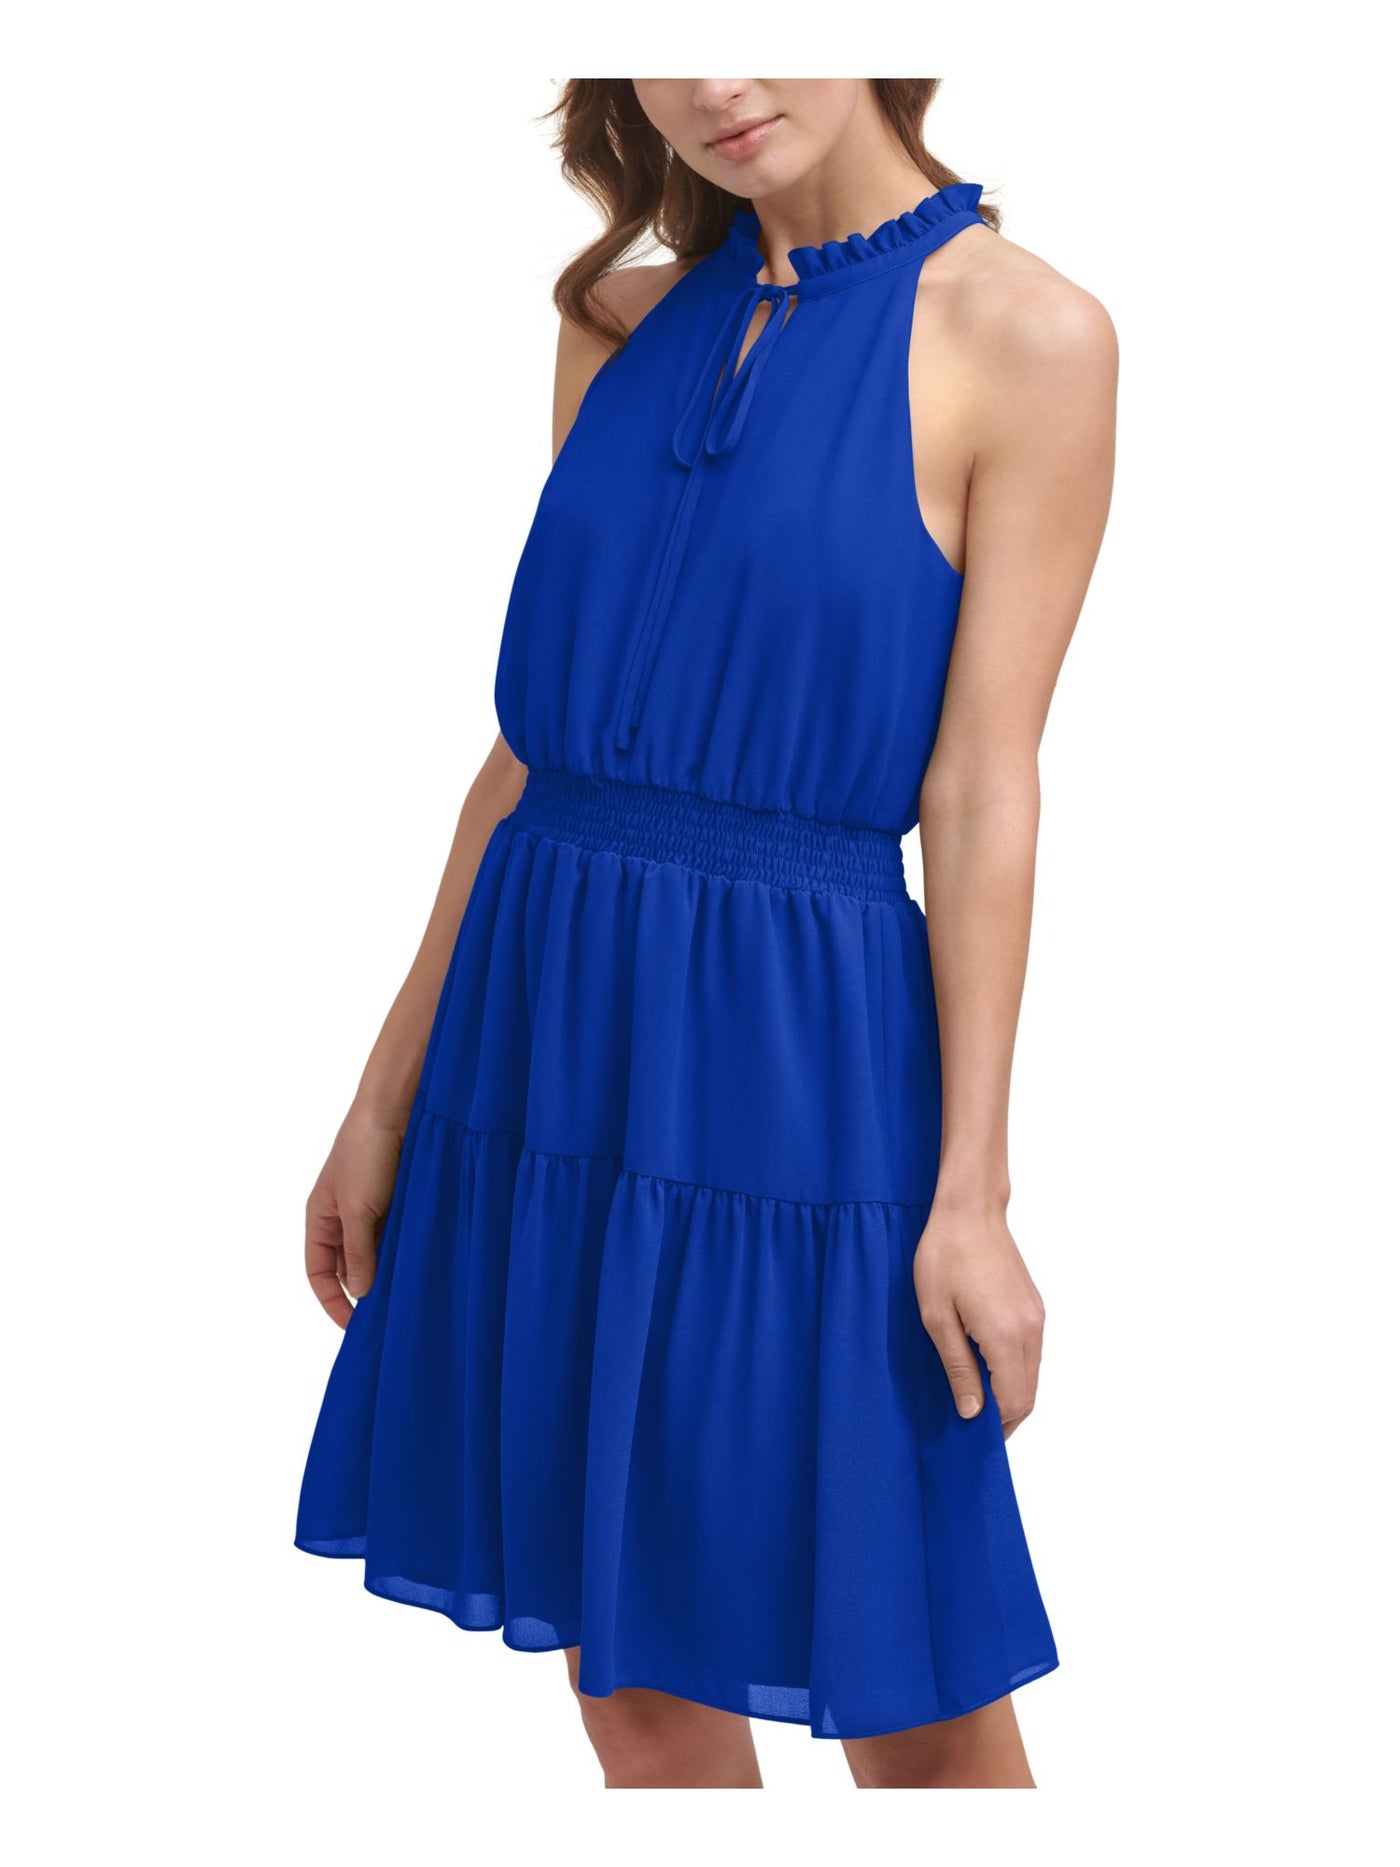 VINCE CAMUTO Womens Blue Ruffled Keyhole Sleeveless Halter Above The Knee Party Fit + Flare Dress Petites 2P